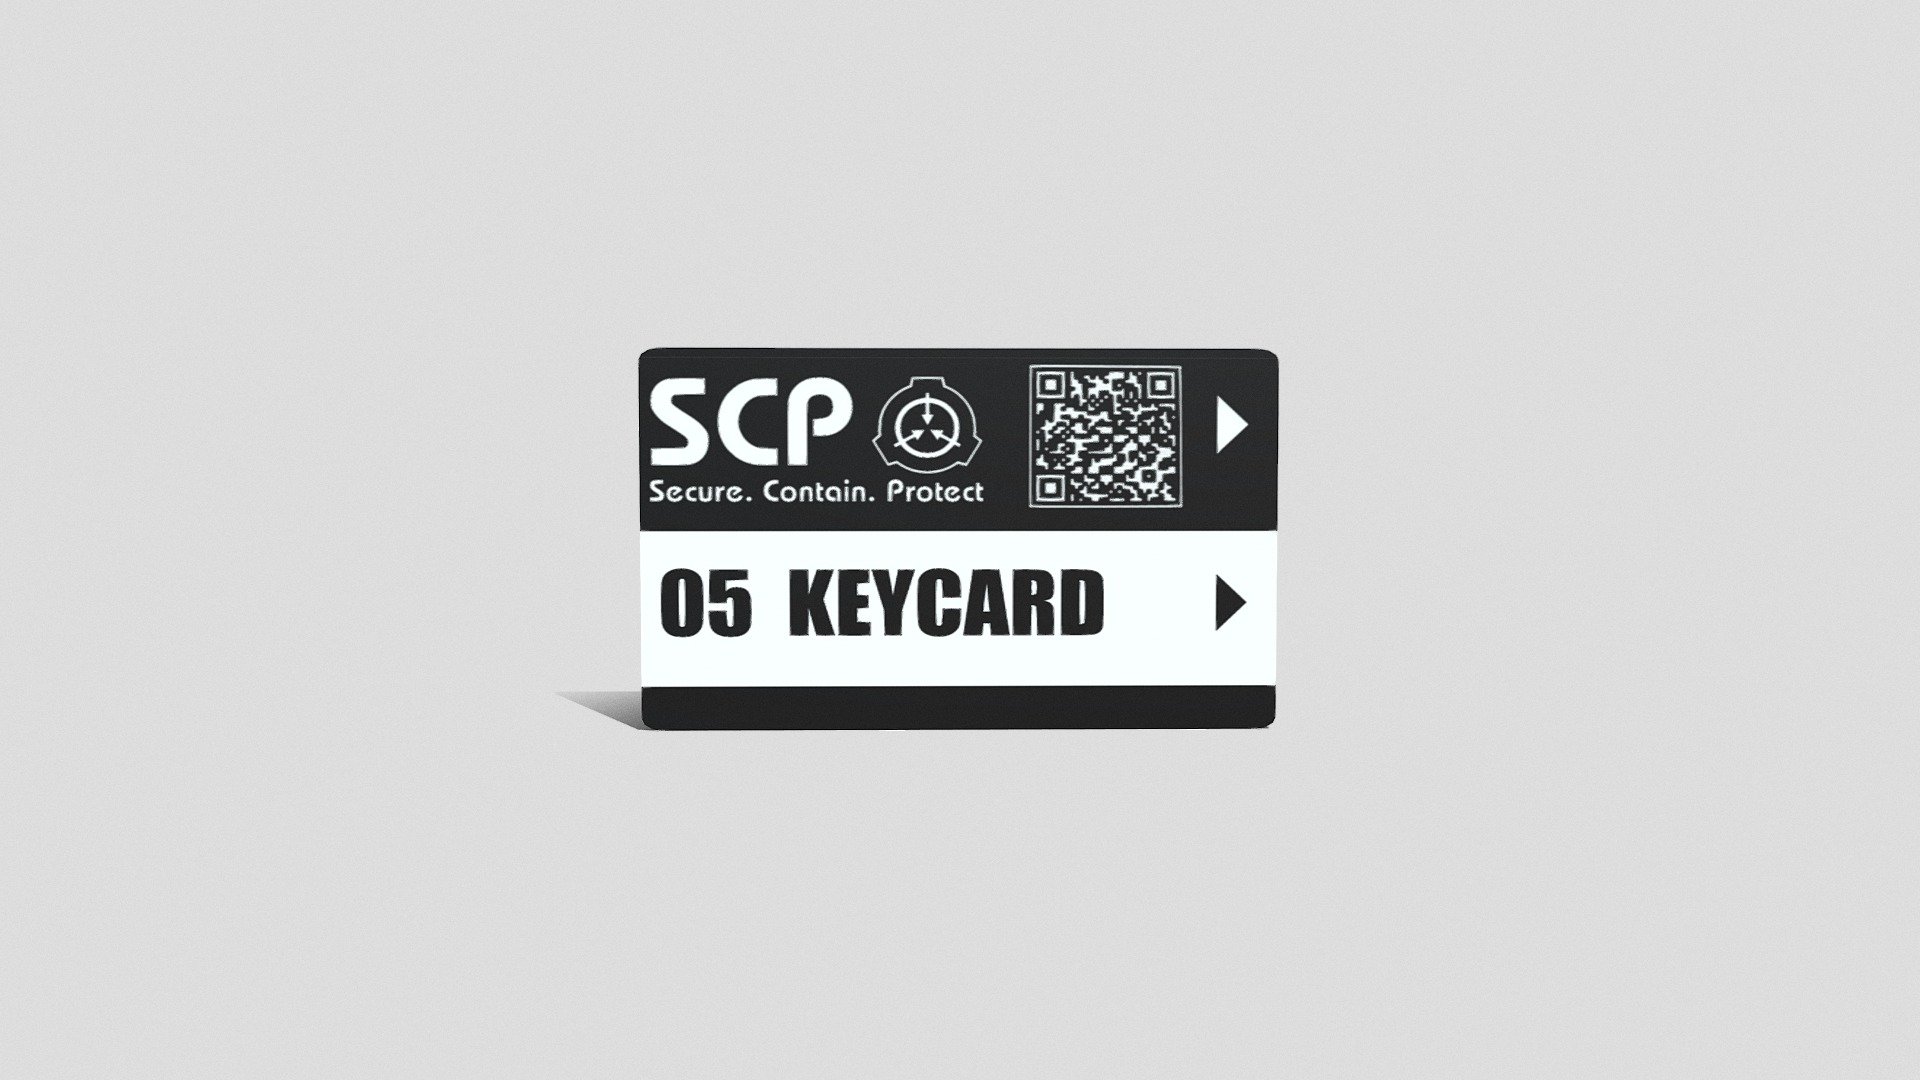 This keymap will give you access to absolutely all locations in the secret base with scp - Key card lvl 5 - Download Free 3D model by StayLord 3d model